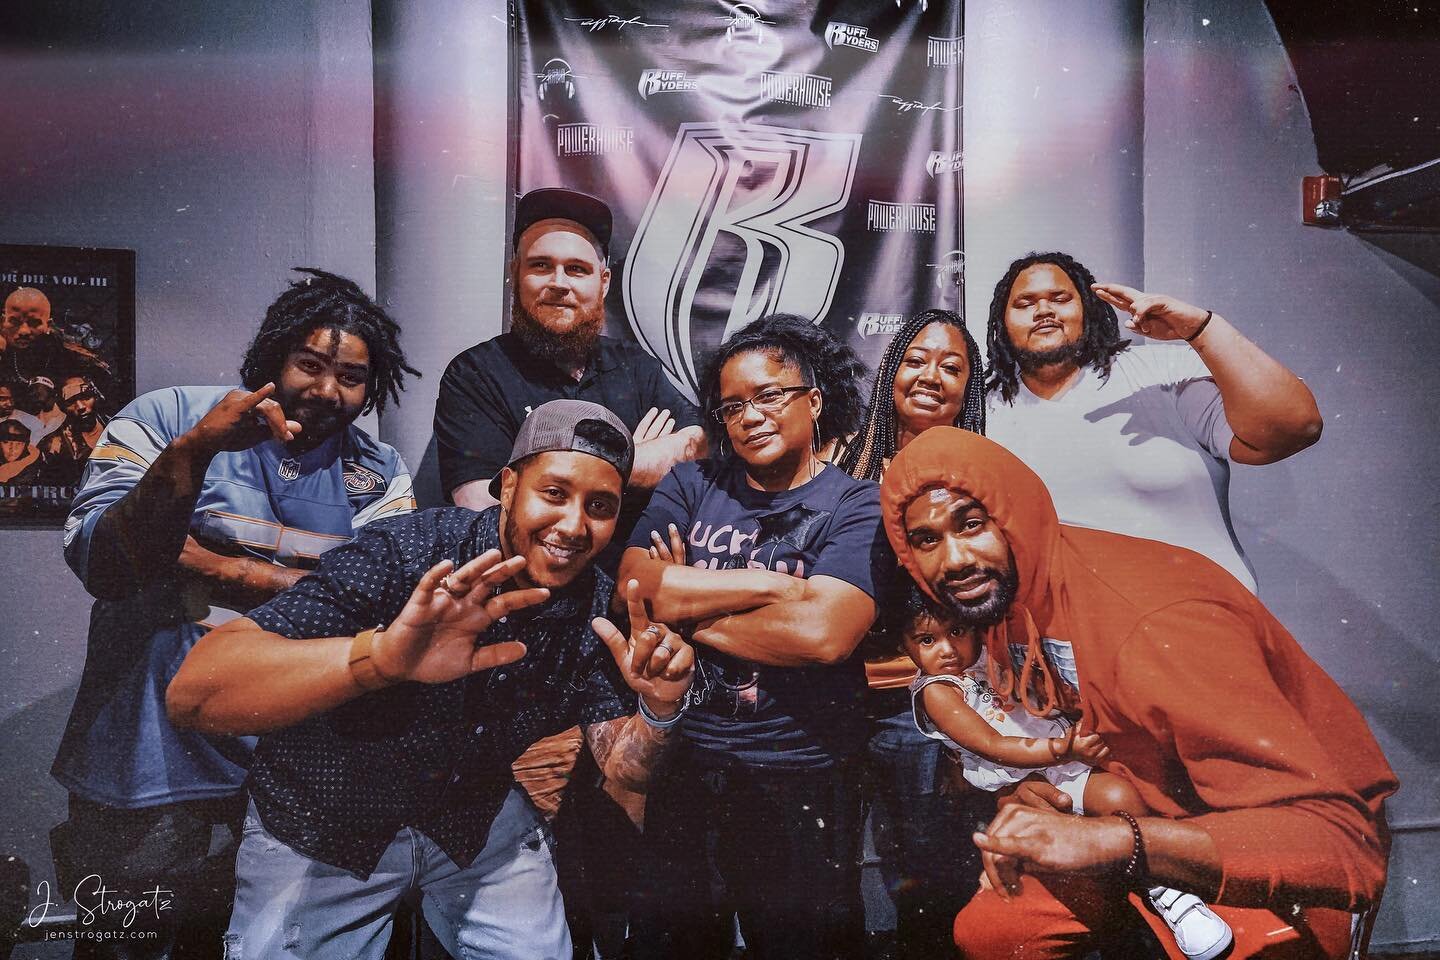 Cause that&rsquo;s how Ruff Ryders roll 🙆🏼&zwj;♀️
Ruff Ryders Radio show - Yonkers, NY 🎬 shot for @therydealong

Scroll 👈🏼 to see me 👀

#ruffryders #yonkers #phillyphotographer #musicvideodirector